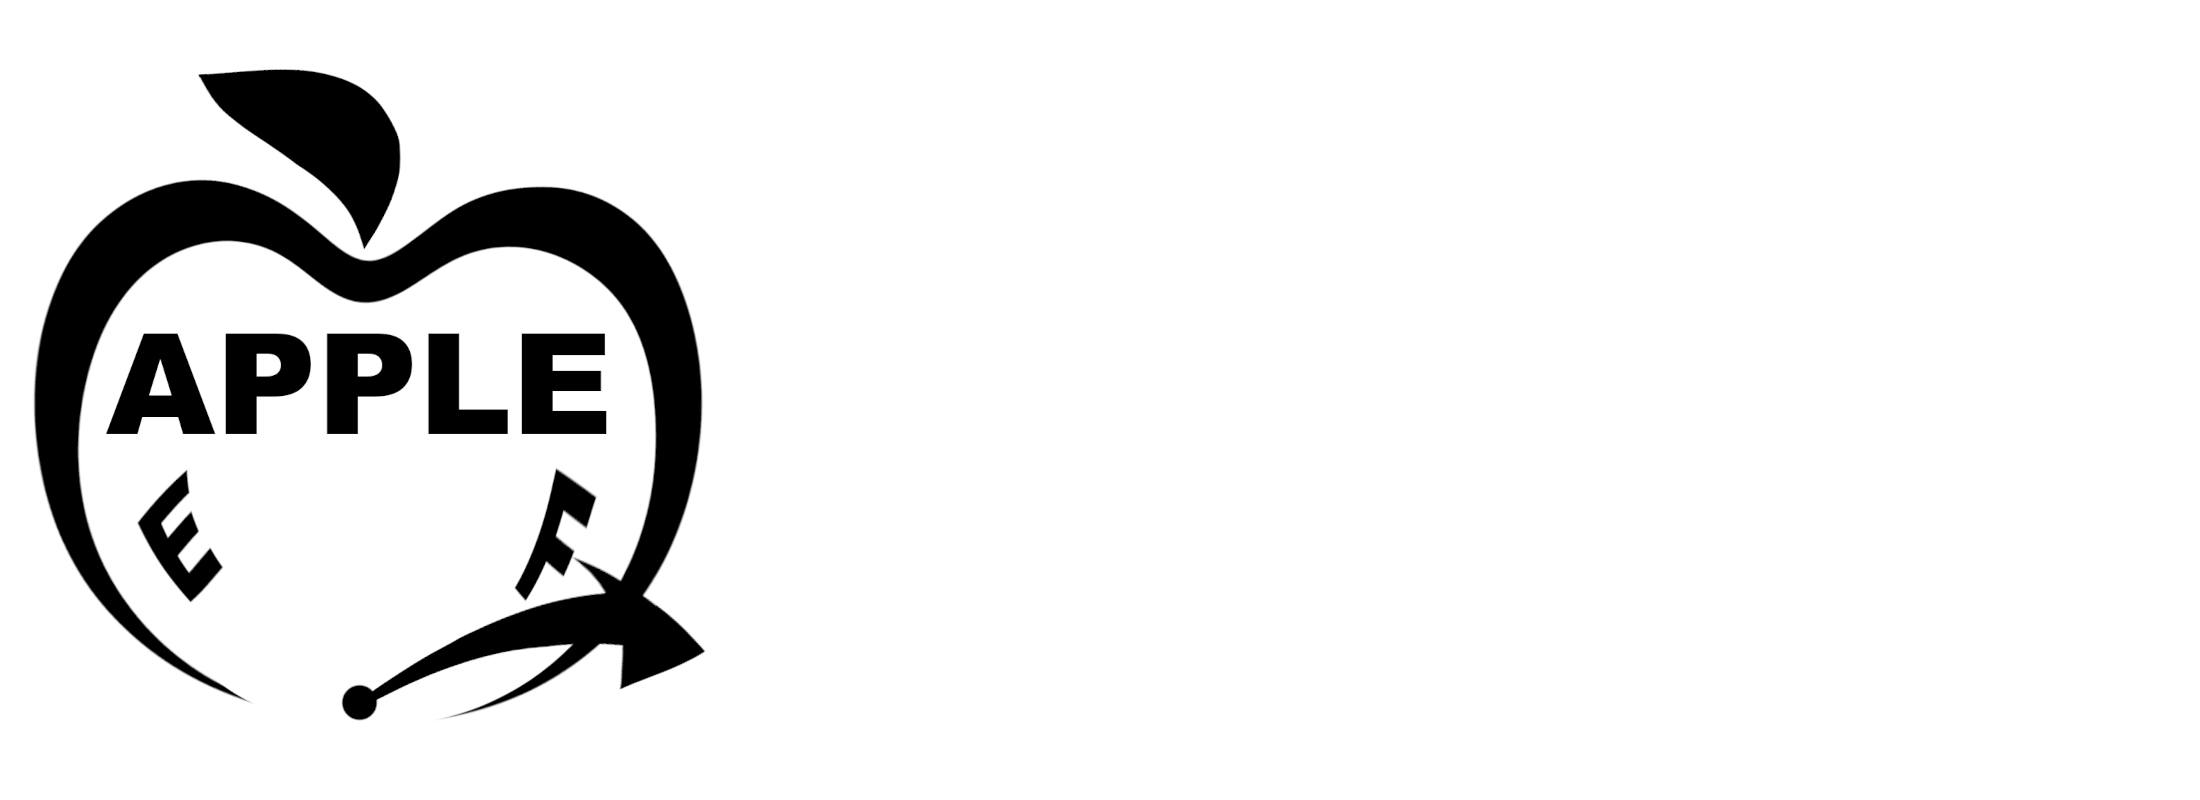 Applied Levels of Expansion